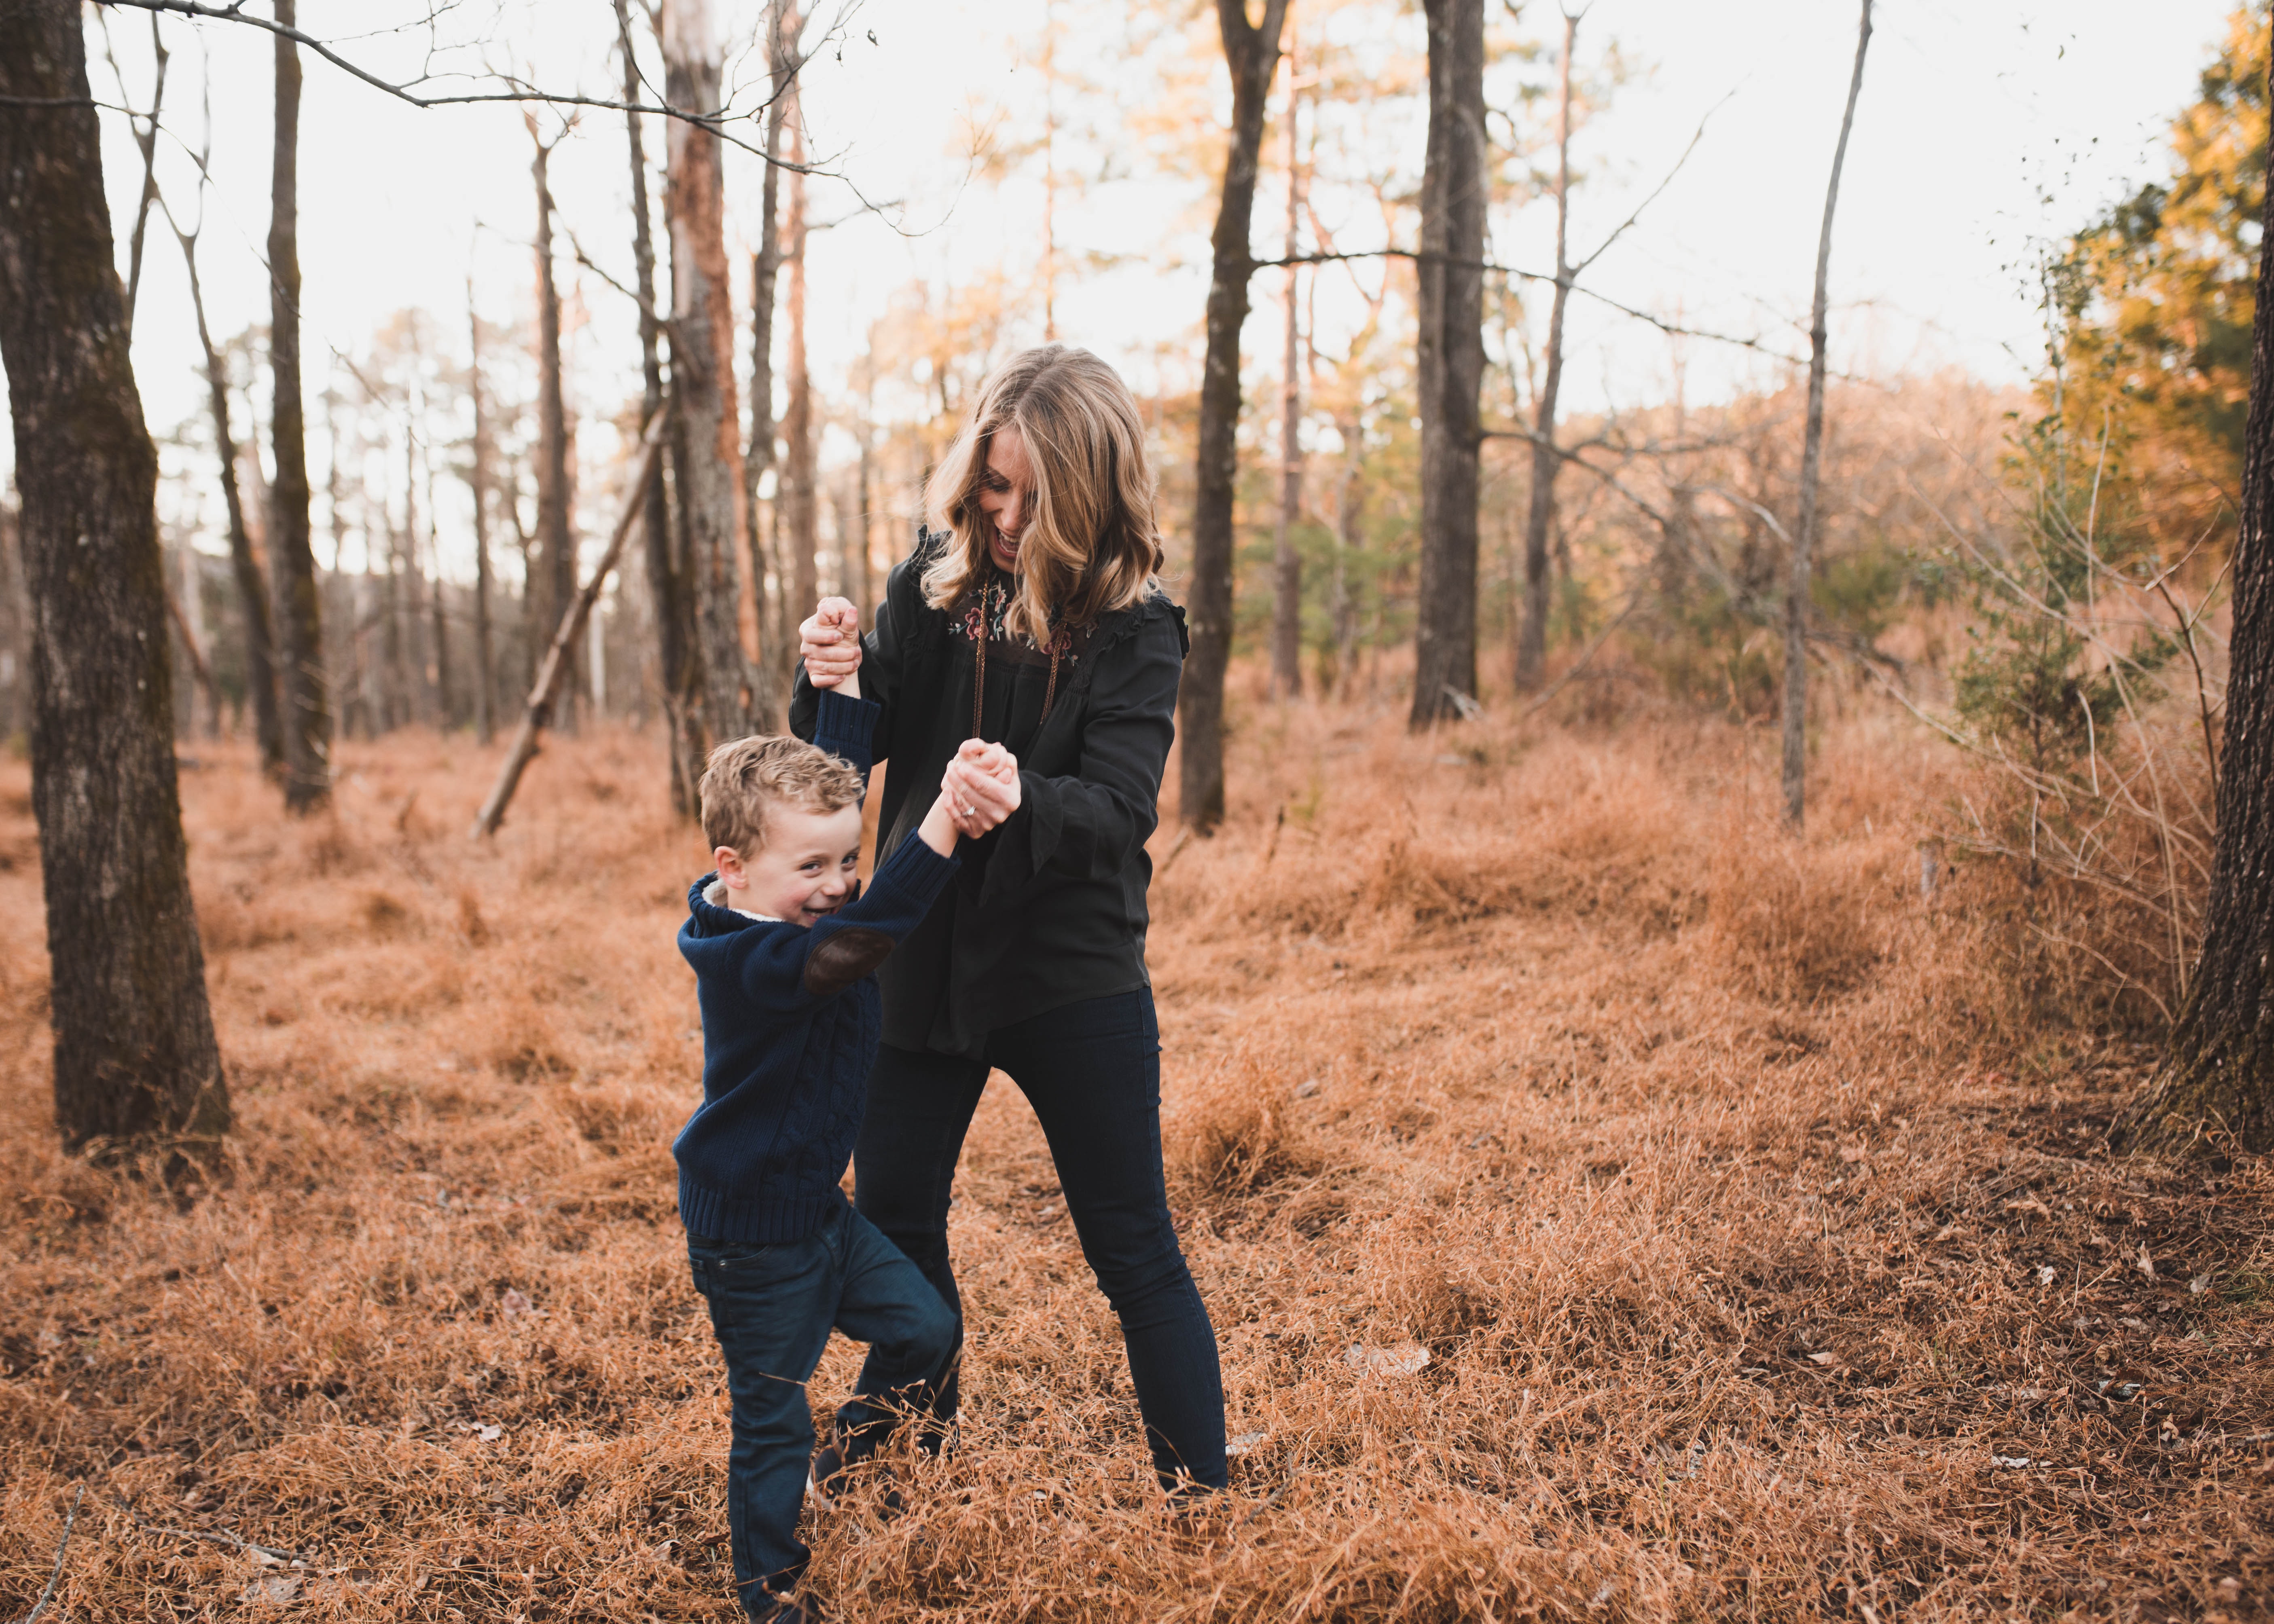 Woman wearing black jacket playing with young boy photo